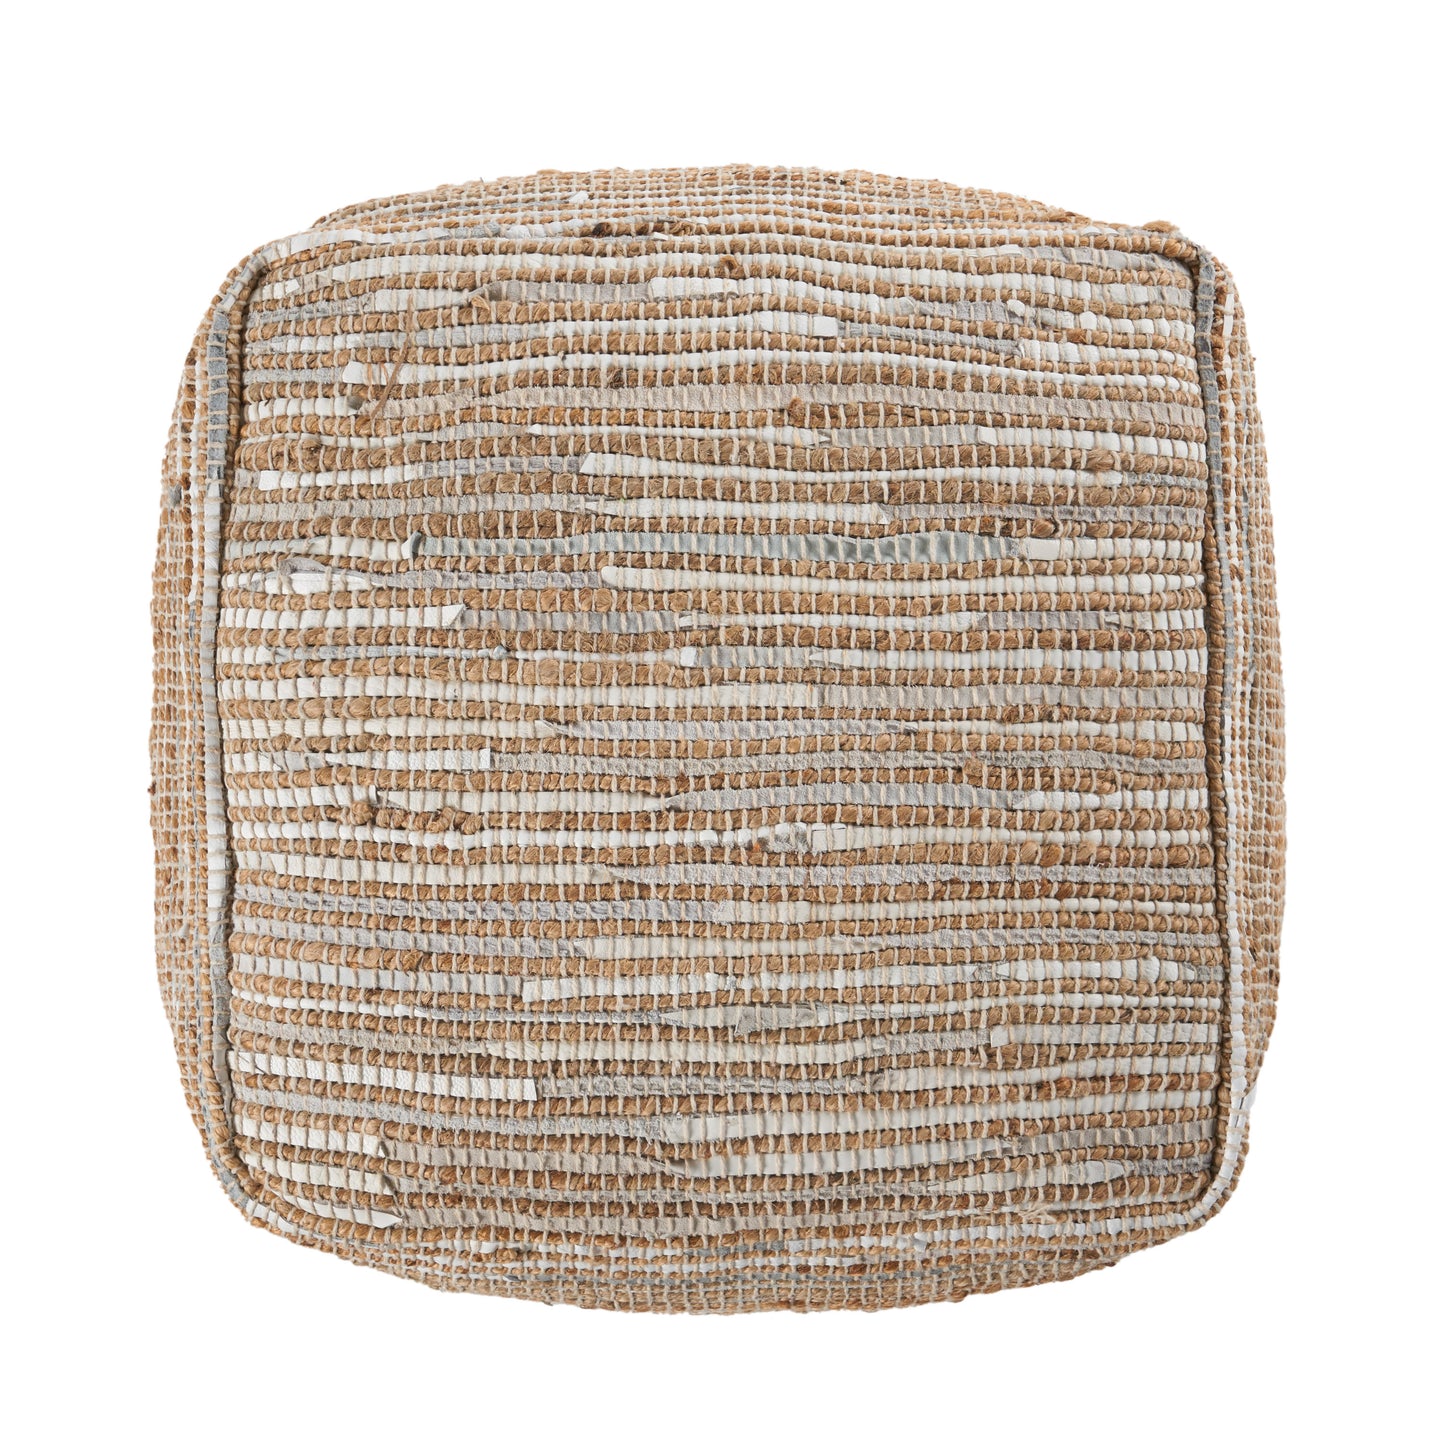 Colbert Handcrafted Boho Cube Pouf